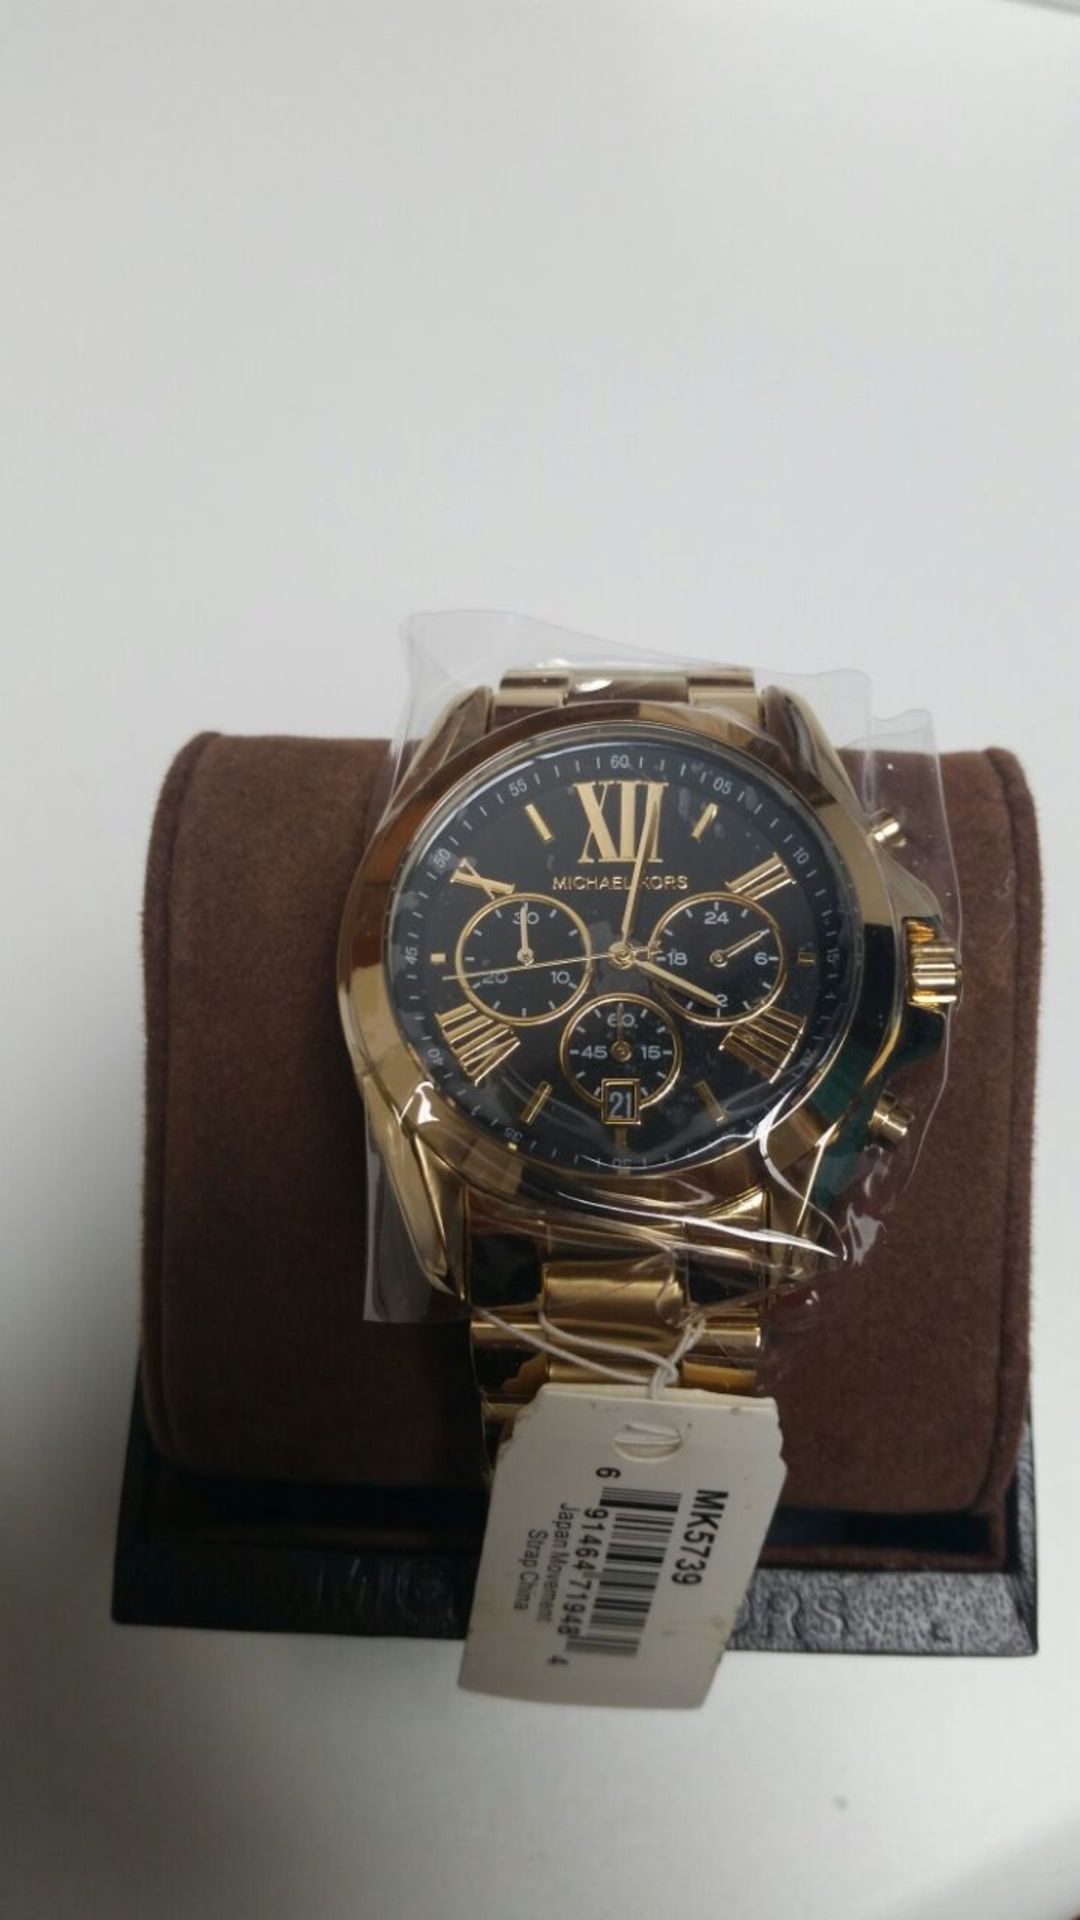 BRAND NEW MICHAEL KORS MK5739, LADIES GOLD COLOURED CHRONOGRAPH WATCH, WITH A BLACK CIRCULAR